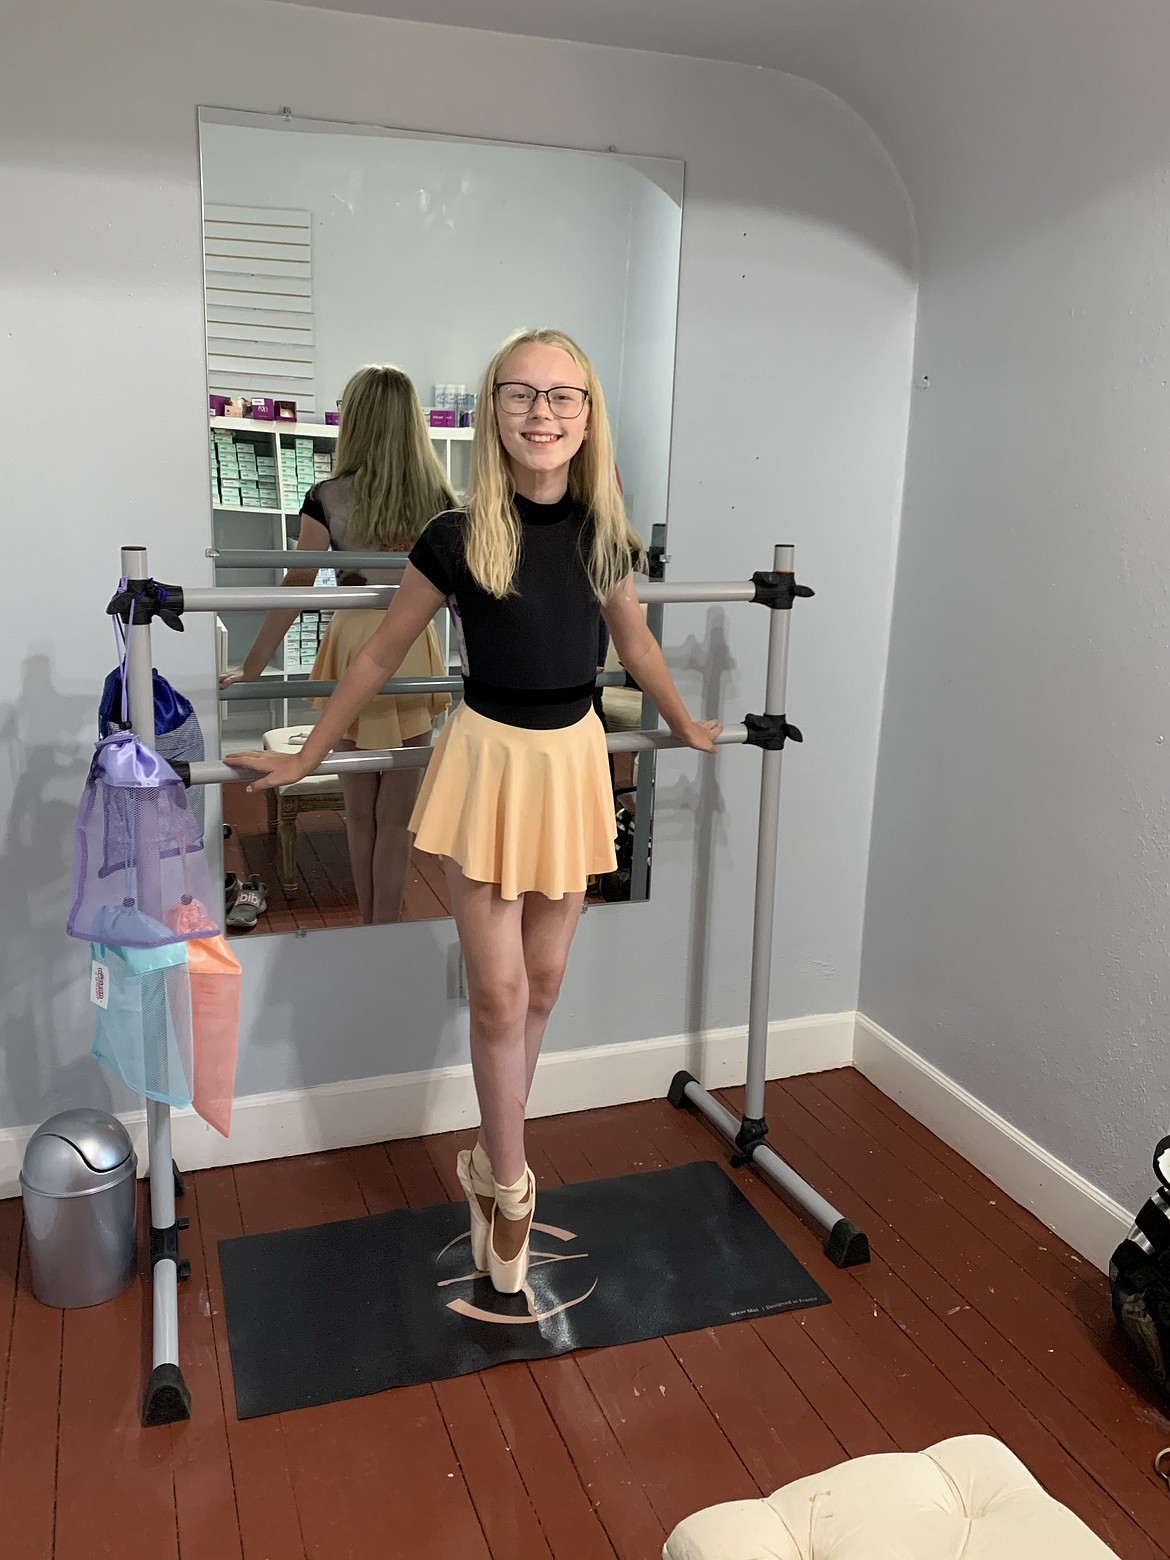 Courtesy photo
Ashlyn Weaver shows off her pointe shoe fittings at the new Bou Cou Dancewear & Fitnesswear at 2112 N Government Way in Coeur d’Alene.